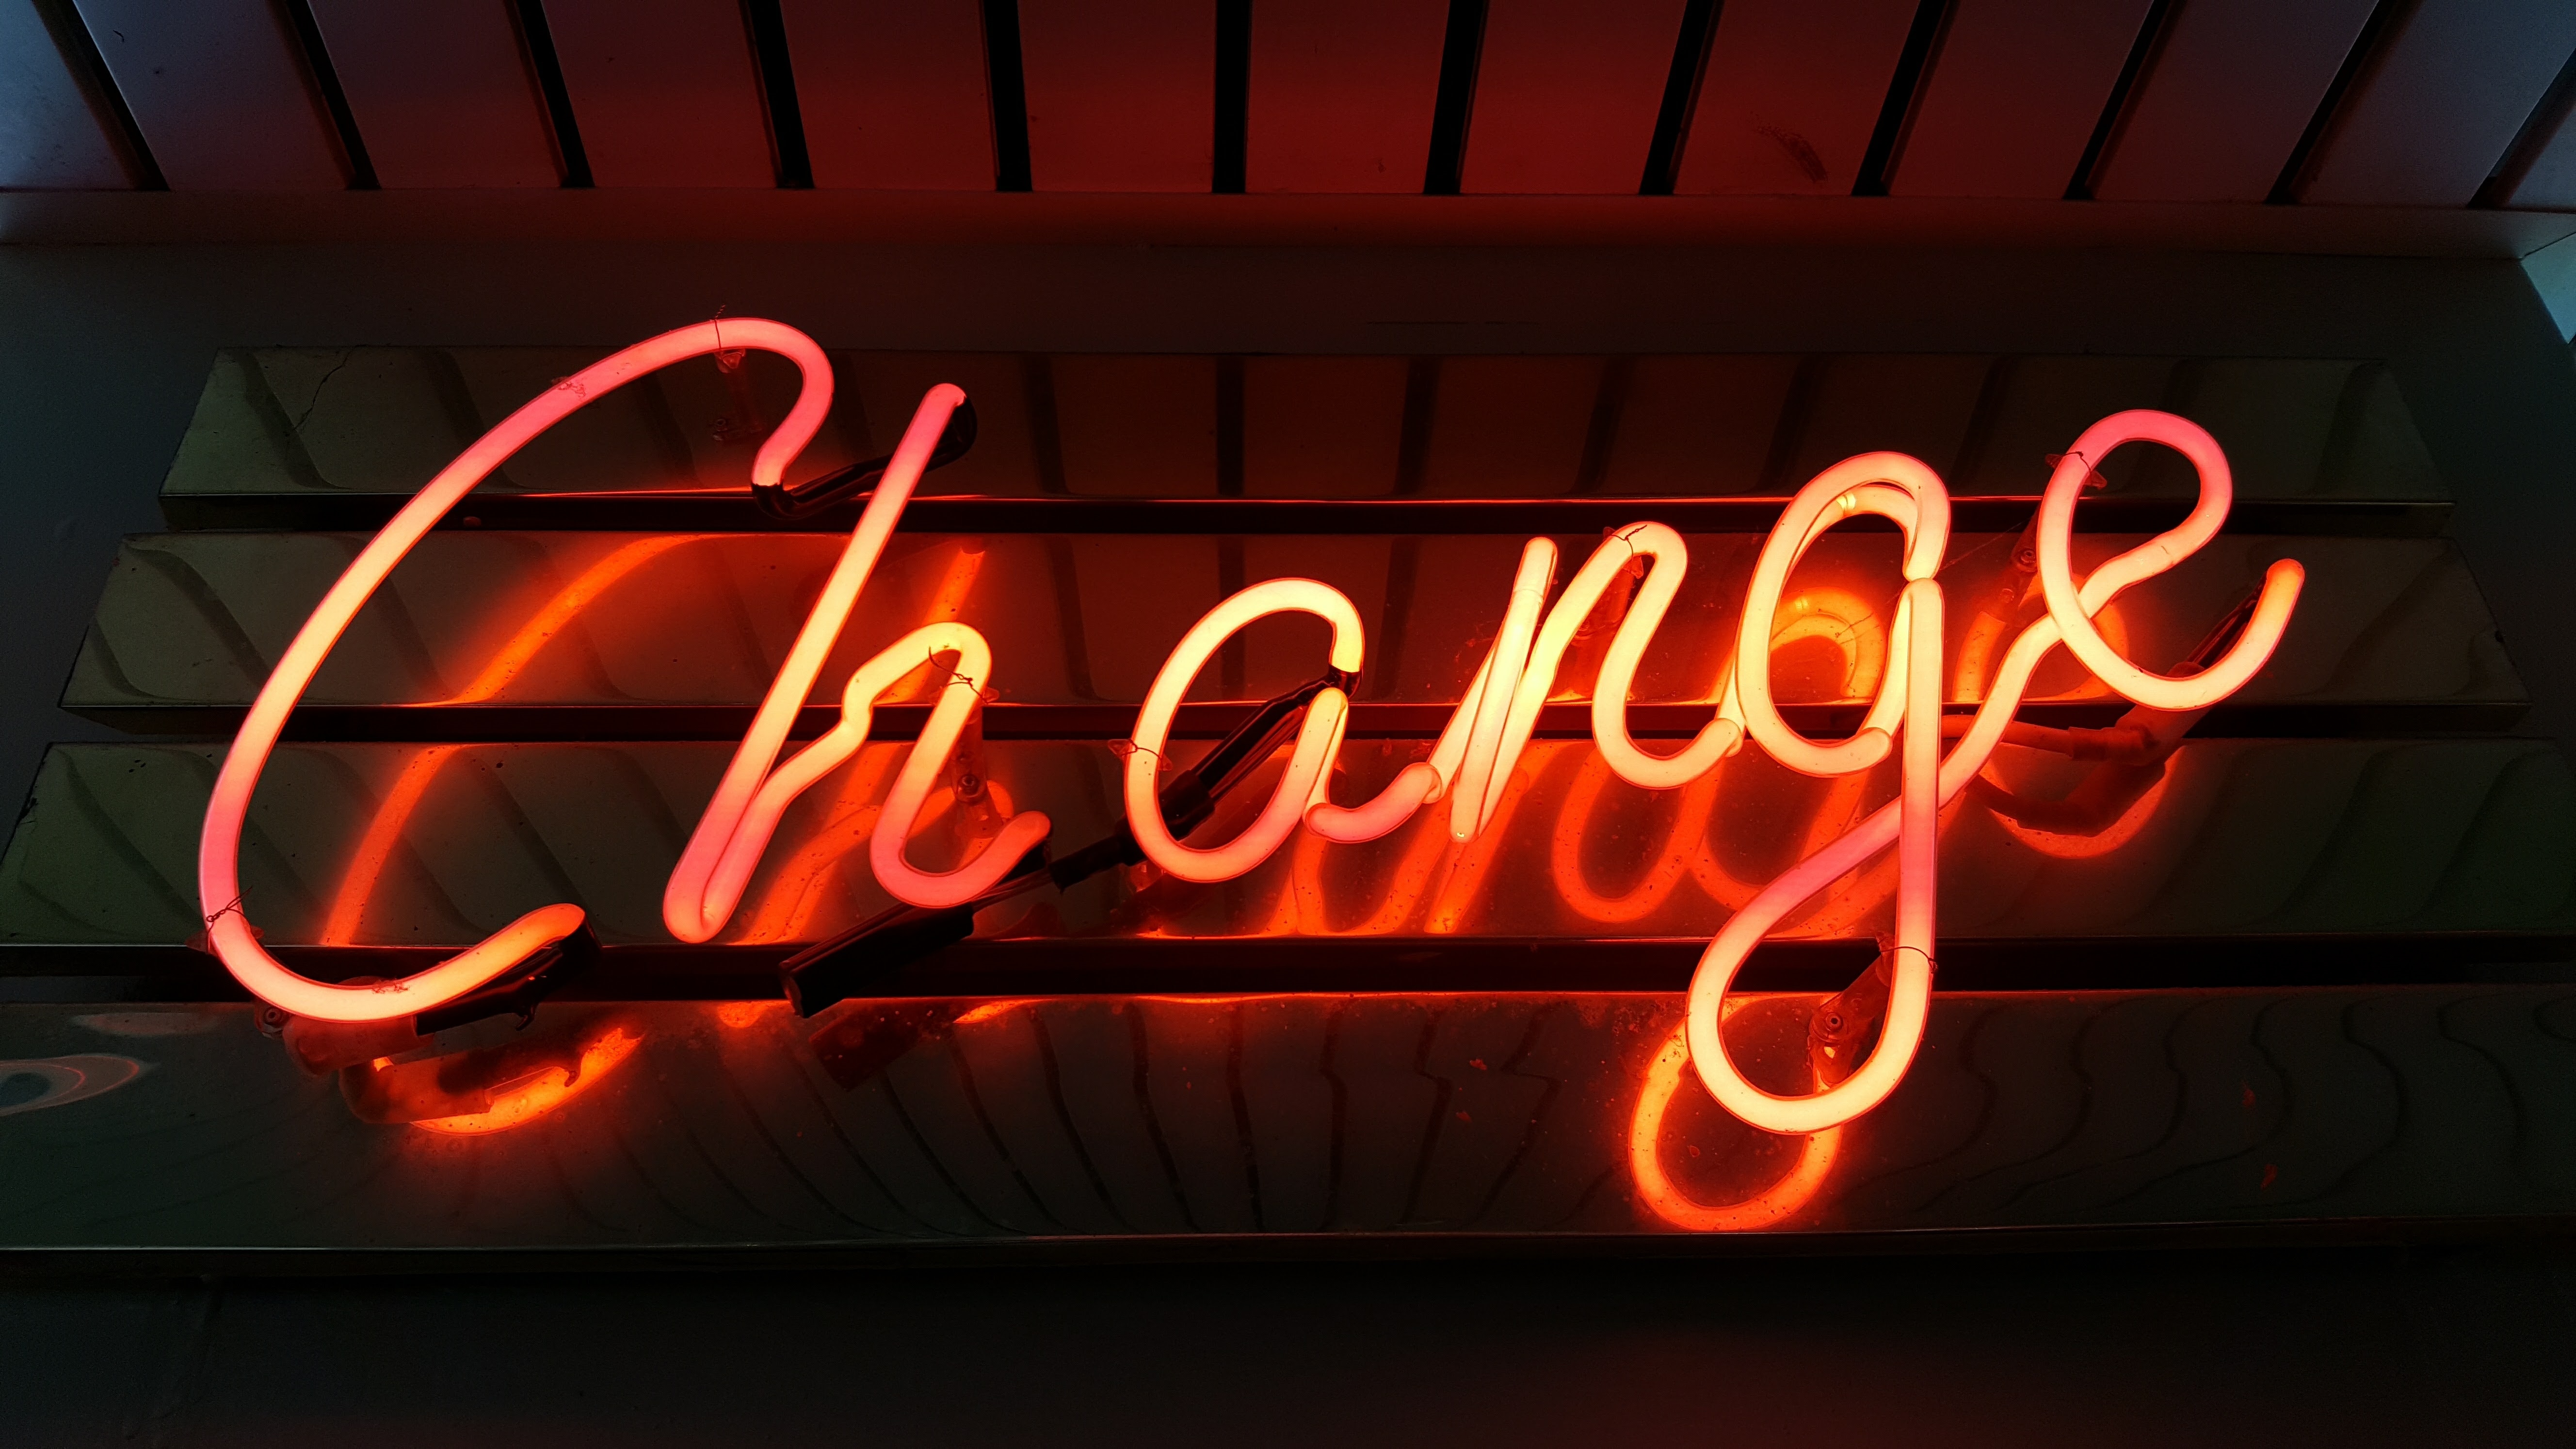 A red neon sign reads "Change"